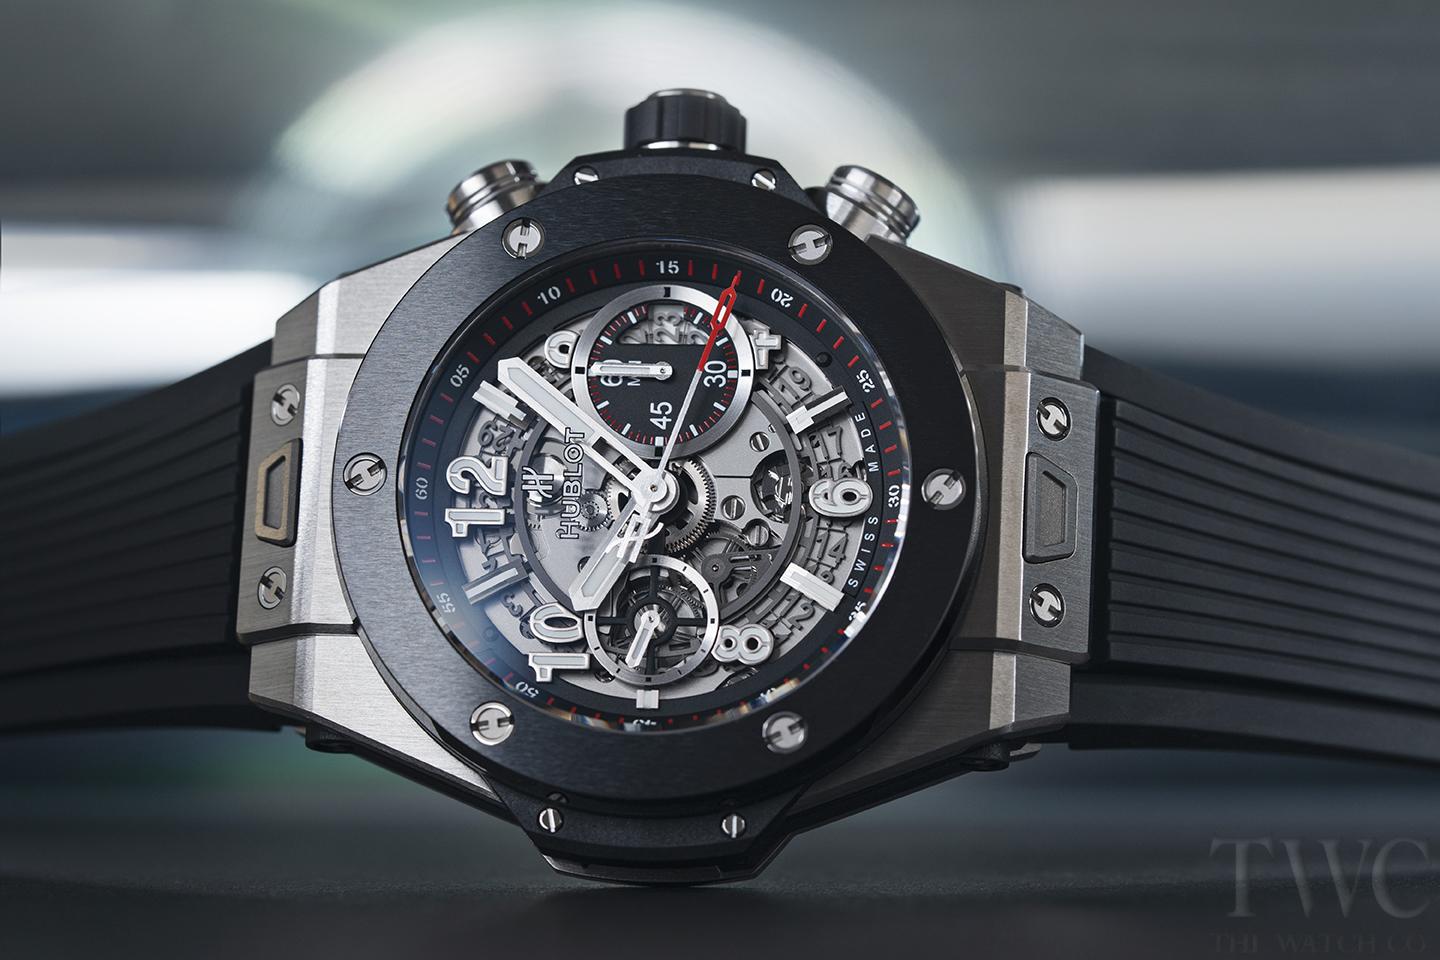 Men’s Skeleton Watches You Need To Own - The Watch Company